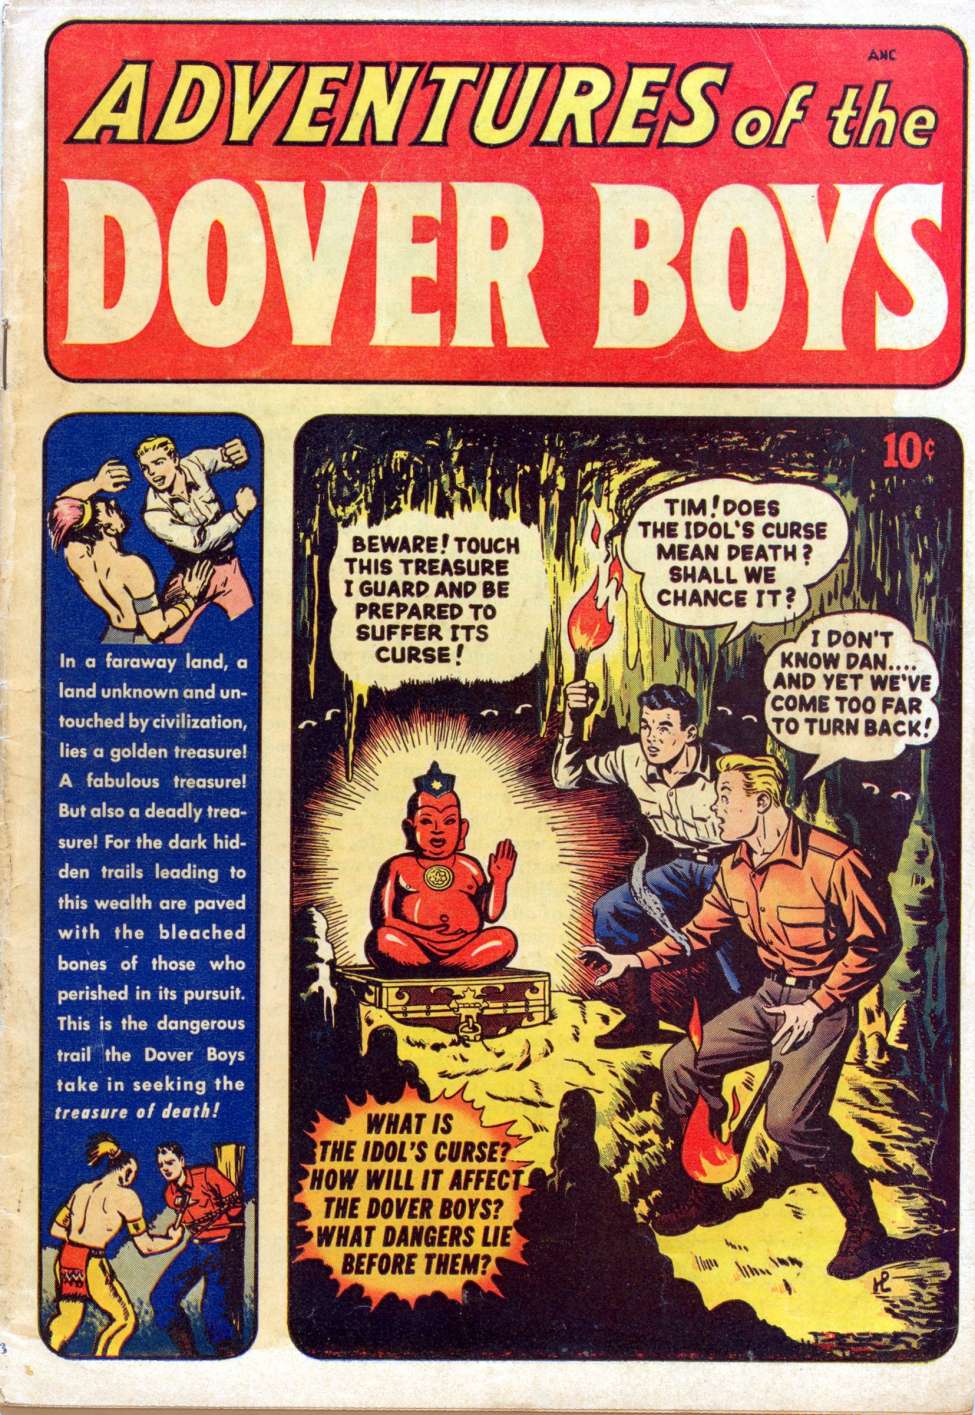 Comic Book Cover For Adventures of the Dover Boys (alt) - Version 2